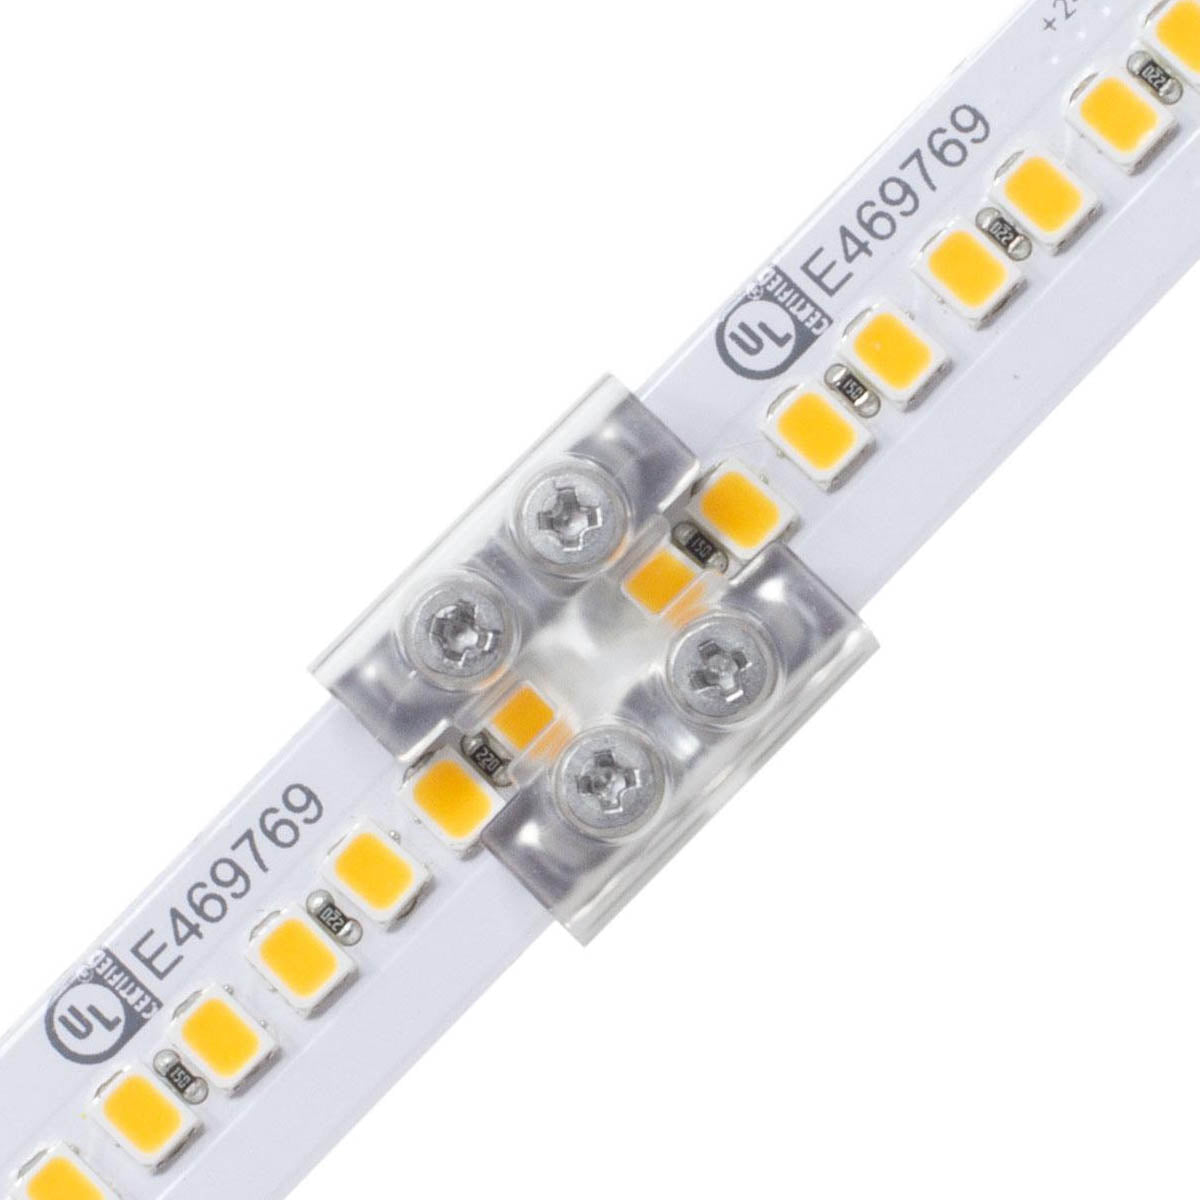 12mm Tape to Tape Terminal Block Connector for Valent X Strip Lights